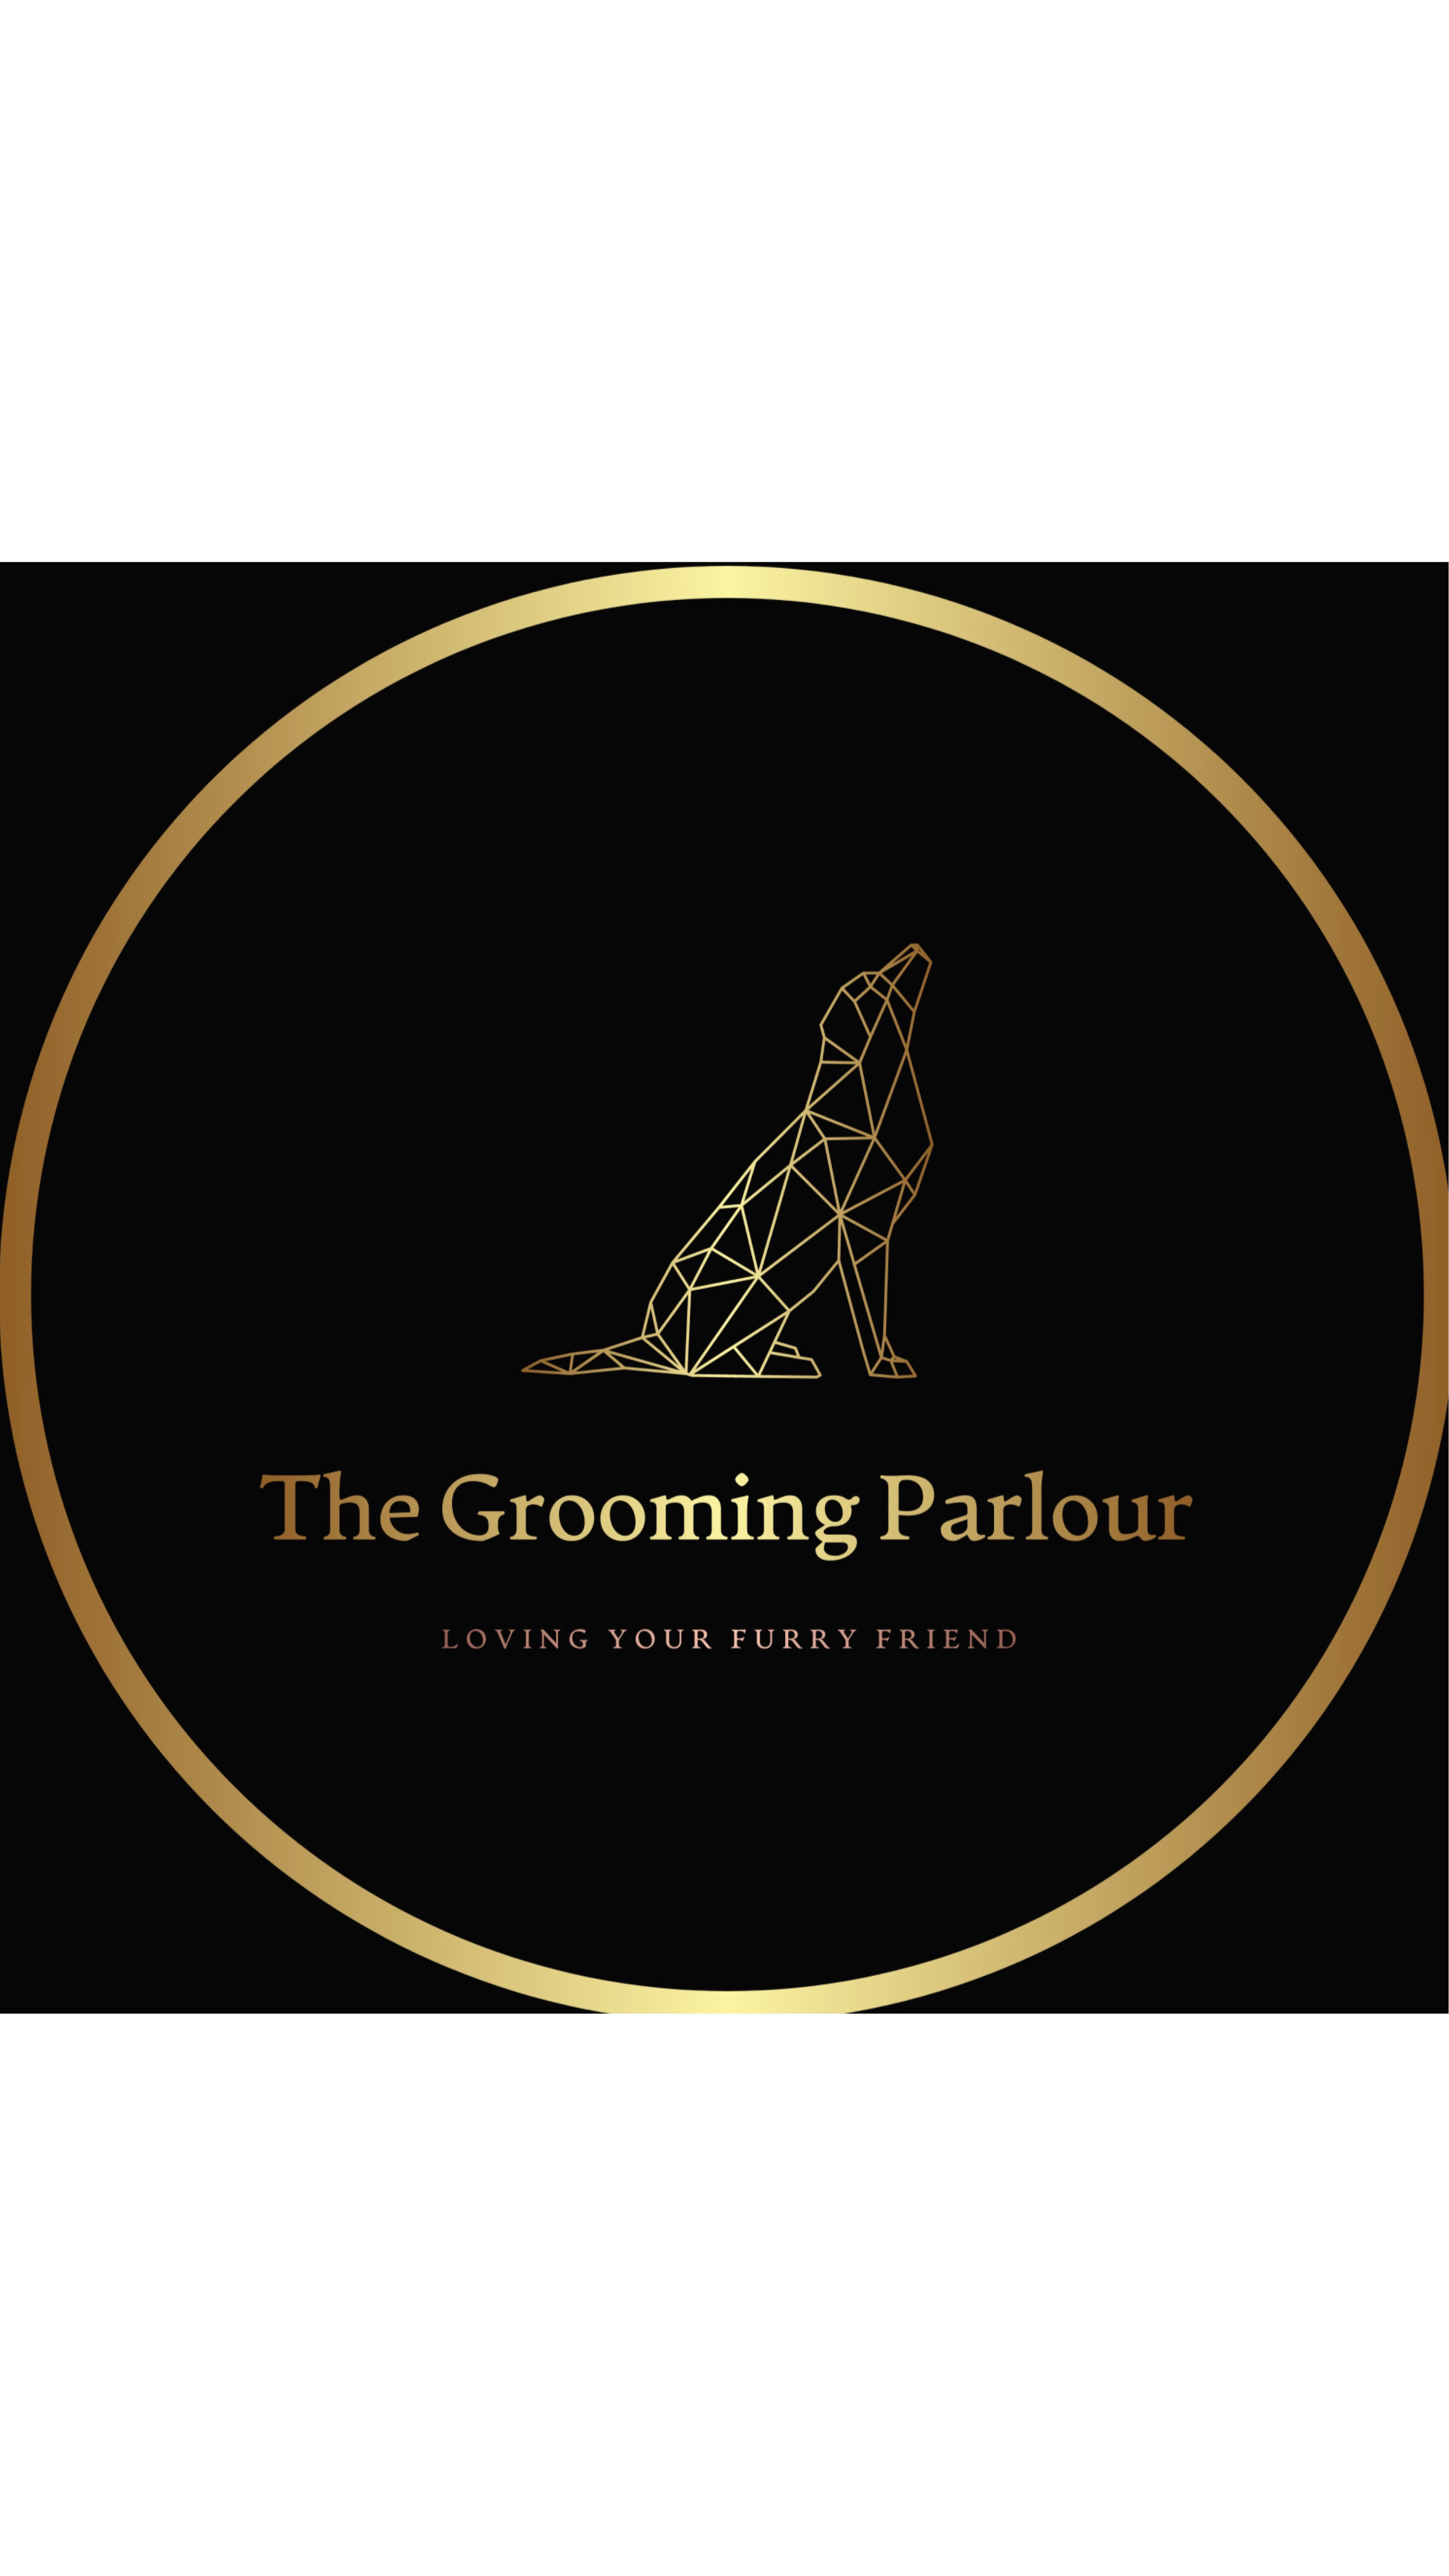 Logo of The Grooming Parlour